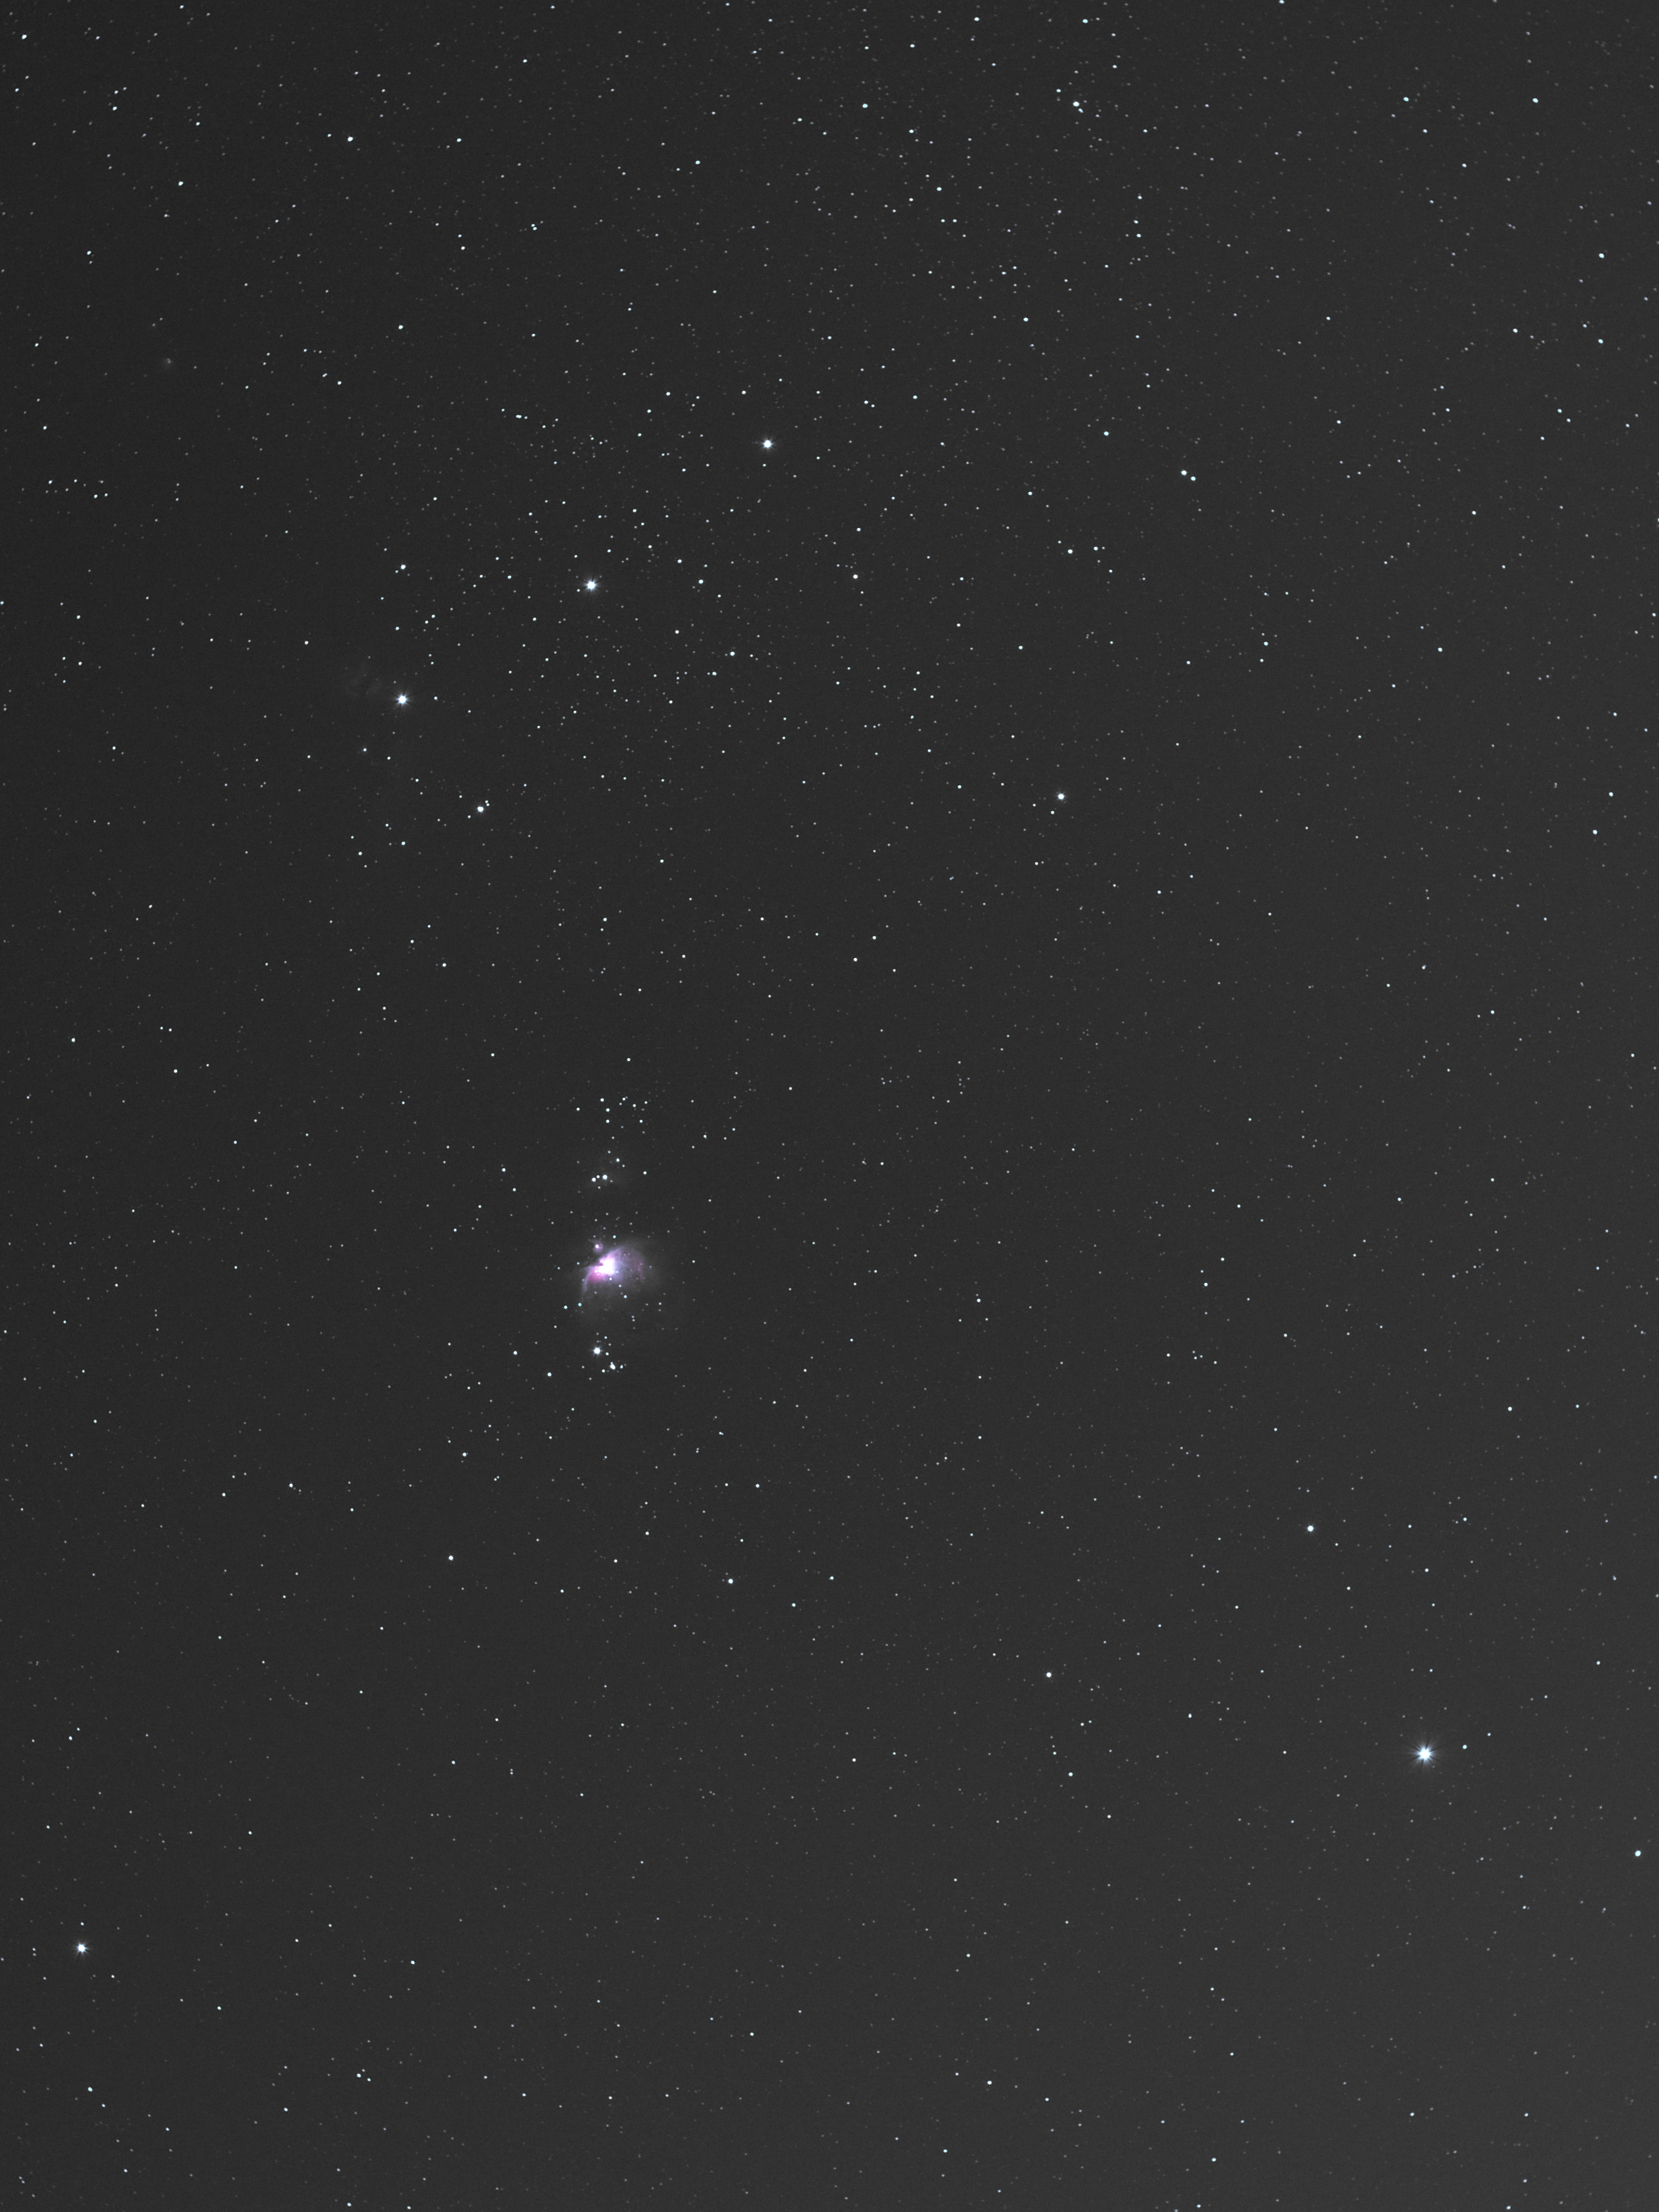 Skyguide 2023-4 - Orion (Image)